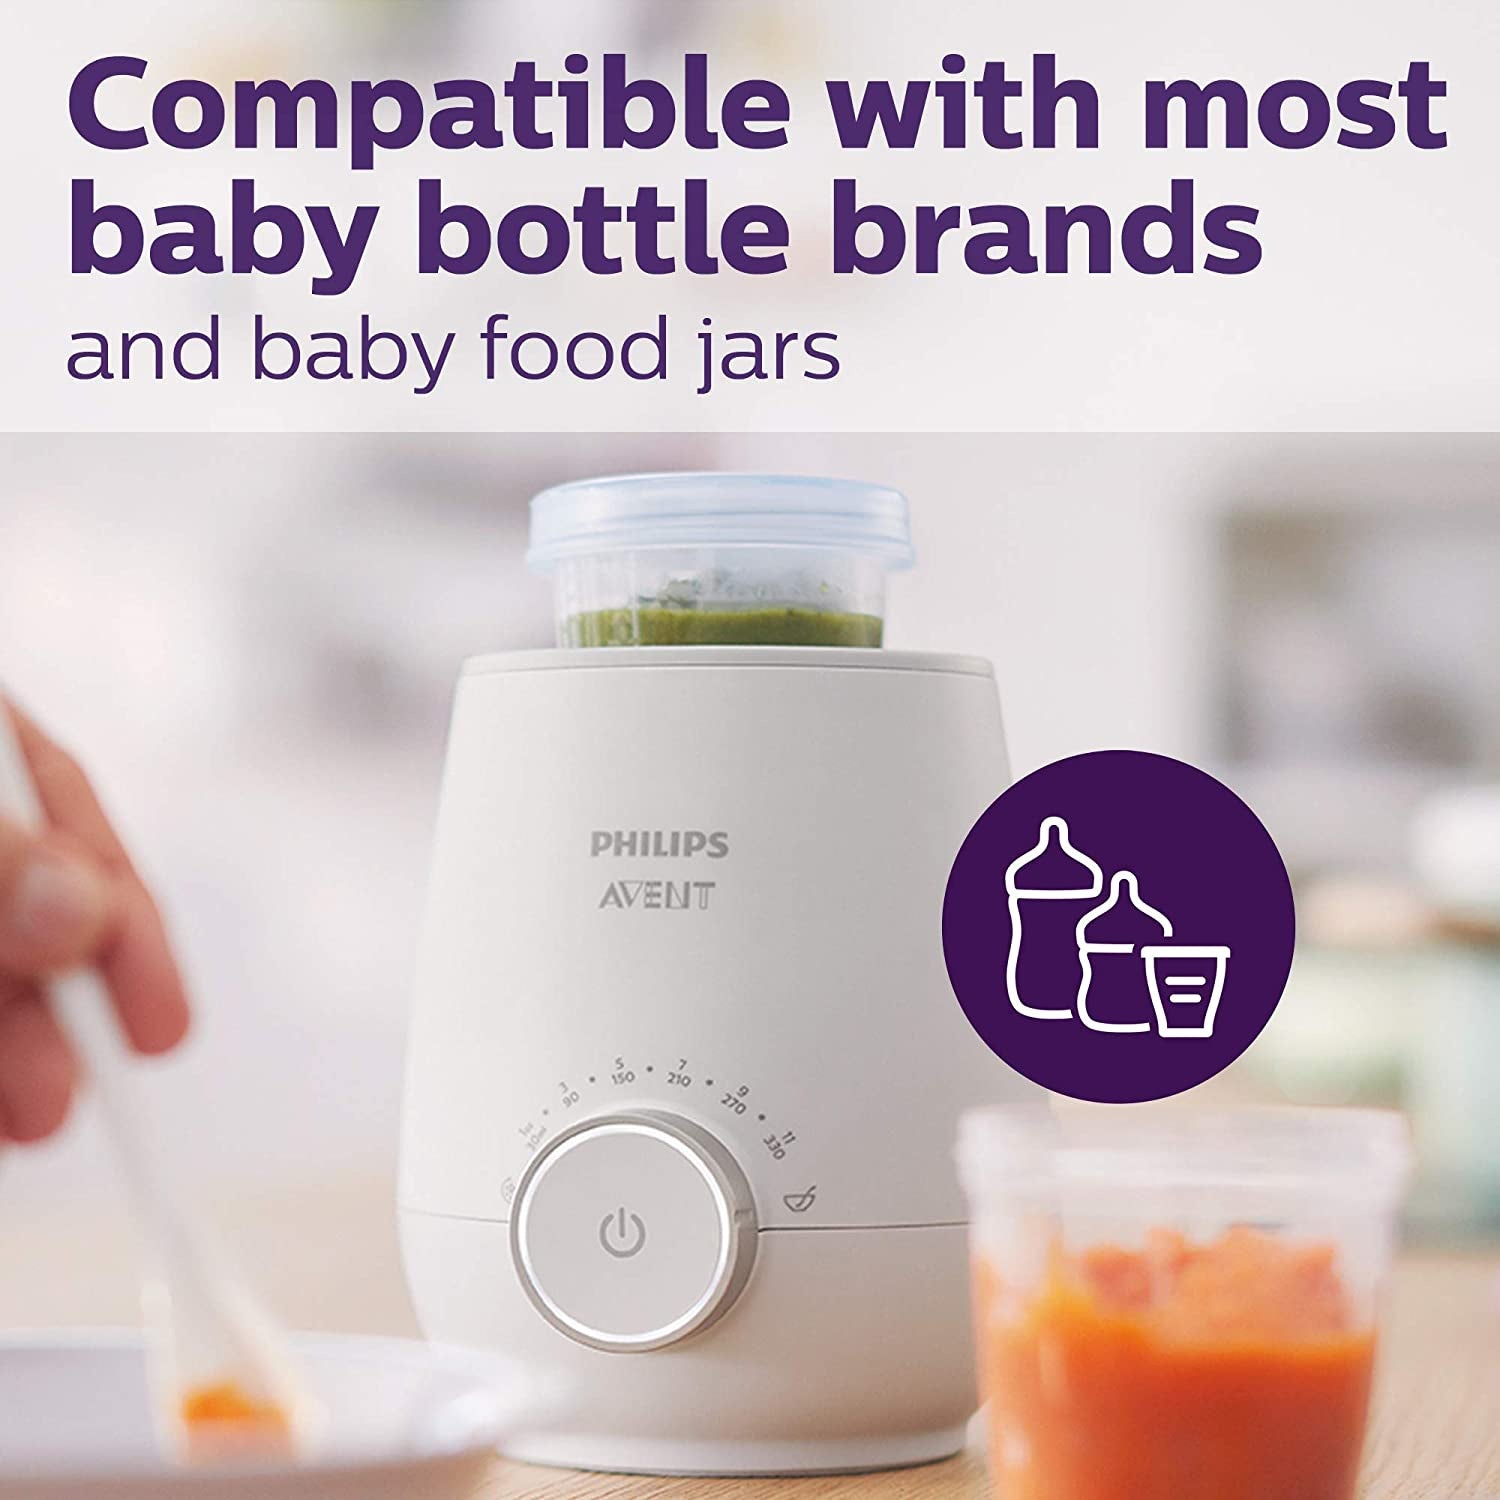 Philips Avent Baby Bottle Warmer with Smart Temperature Control and Automatic Shut-Off